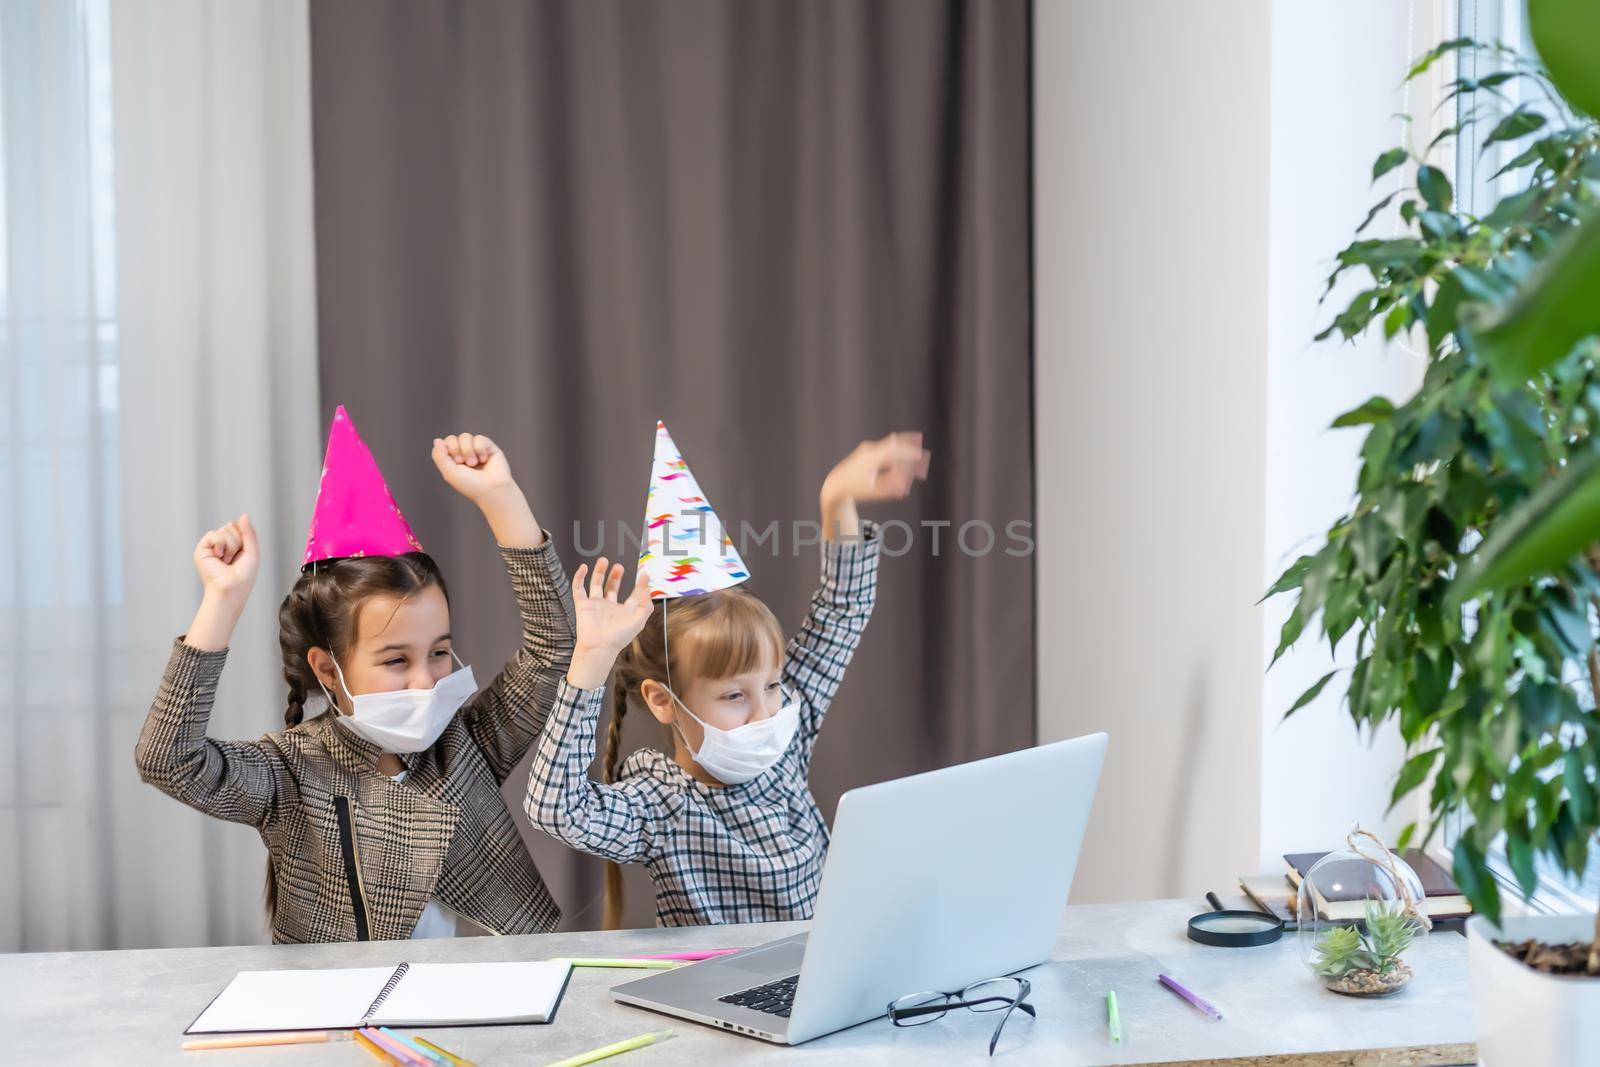 Happy family with two sibling celebrating birthday via internet in quarantine time, self-isolation and family values, online birthday party